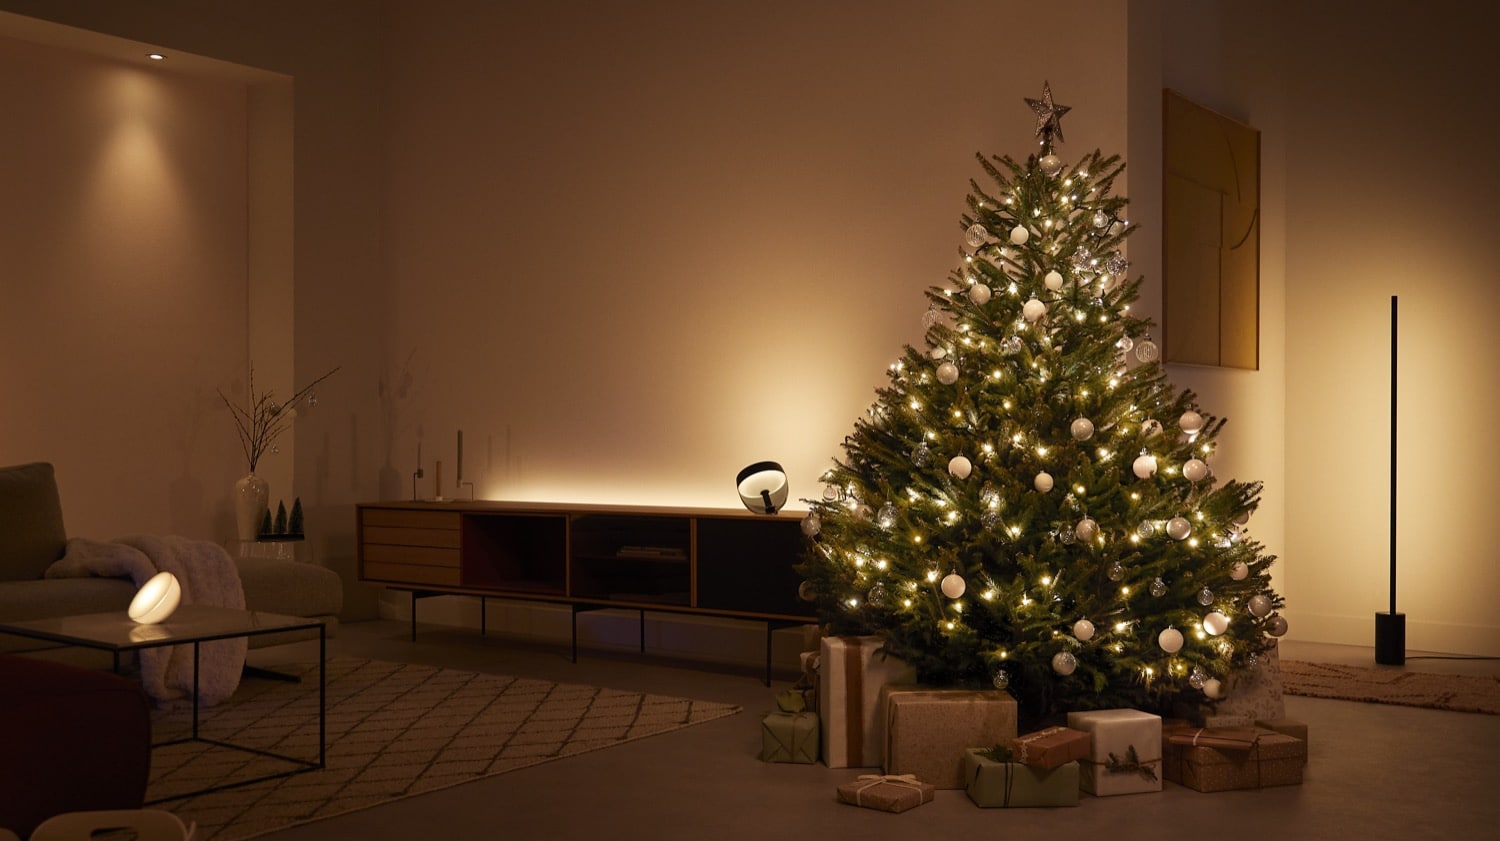 Hueblog: The Philips Hue string light is currently sold out